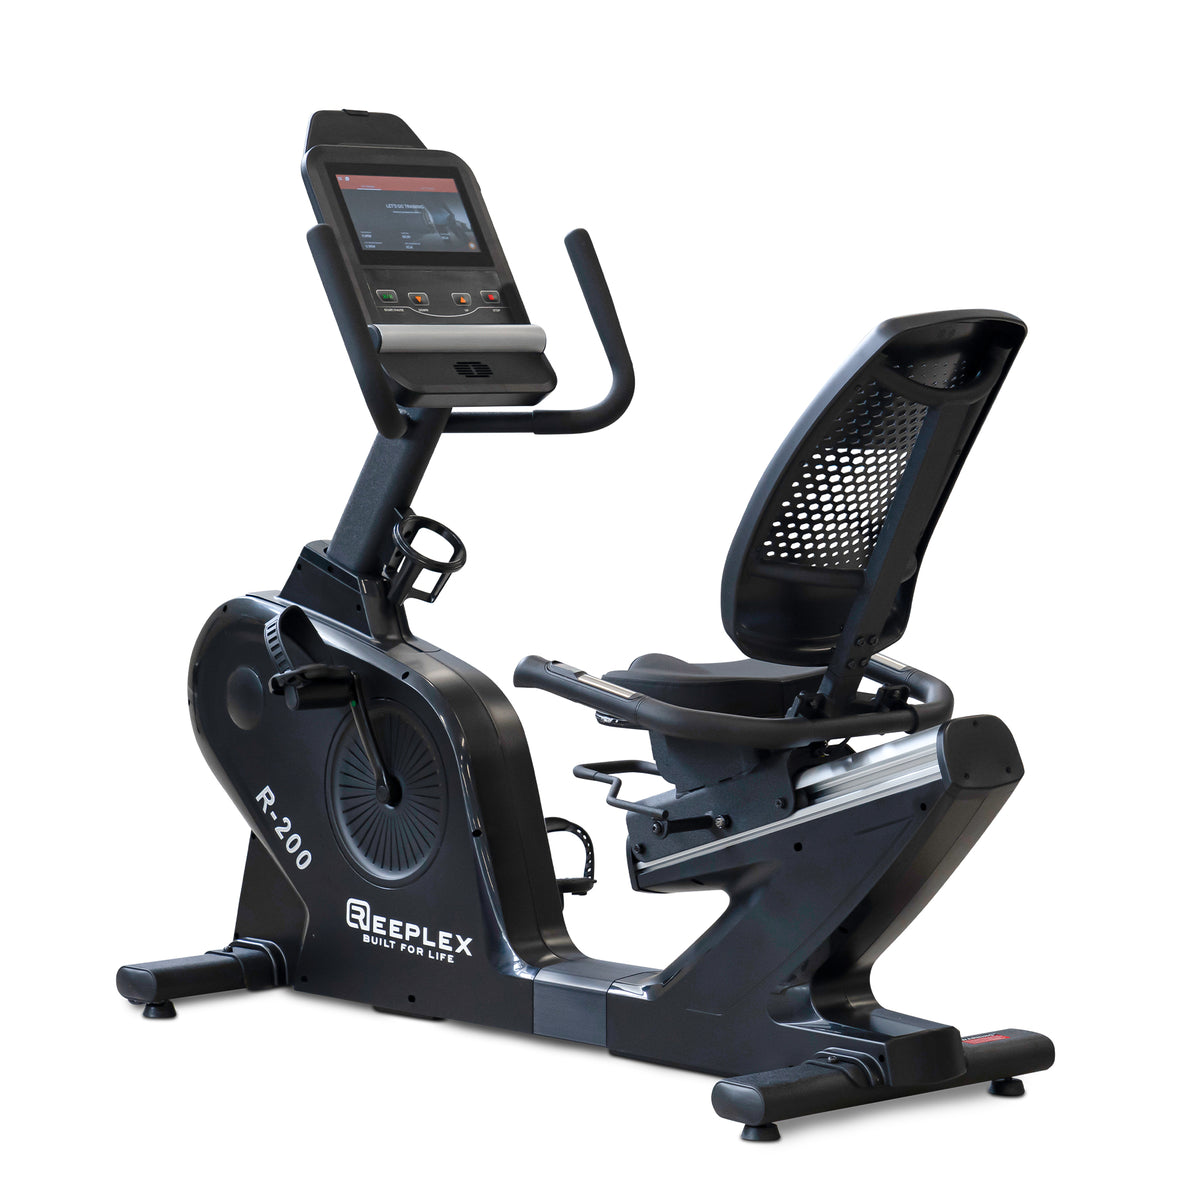 Reeplex R200 Commercial Recumbent Exercise Bike with 10" Touchscreen Display Motion Series